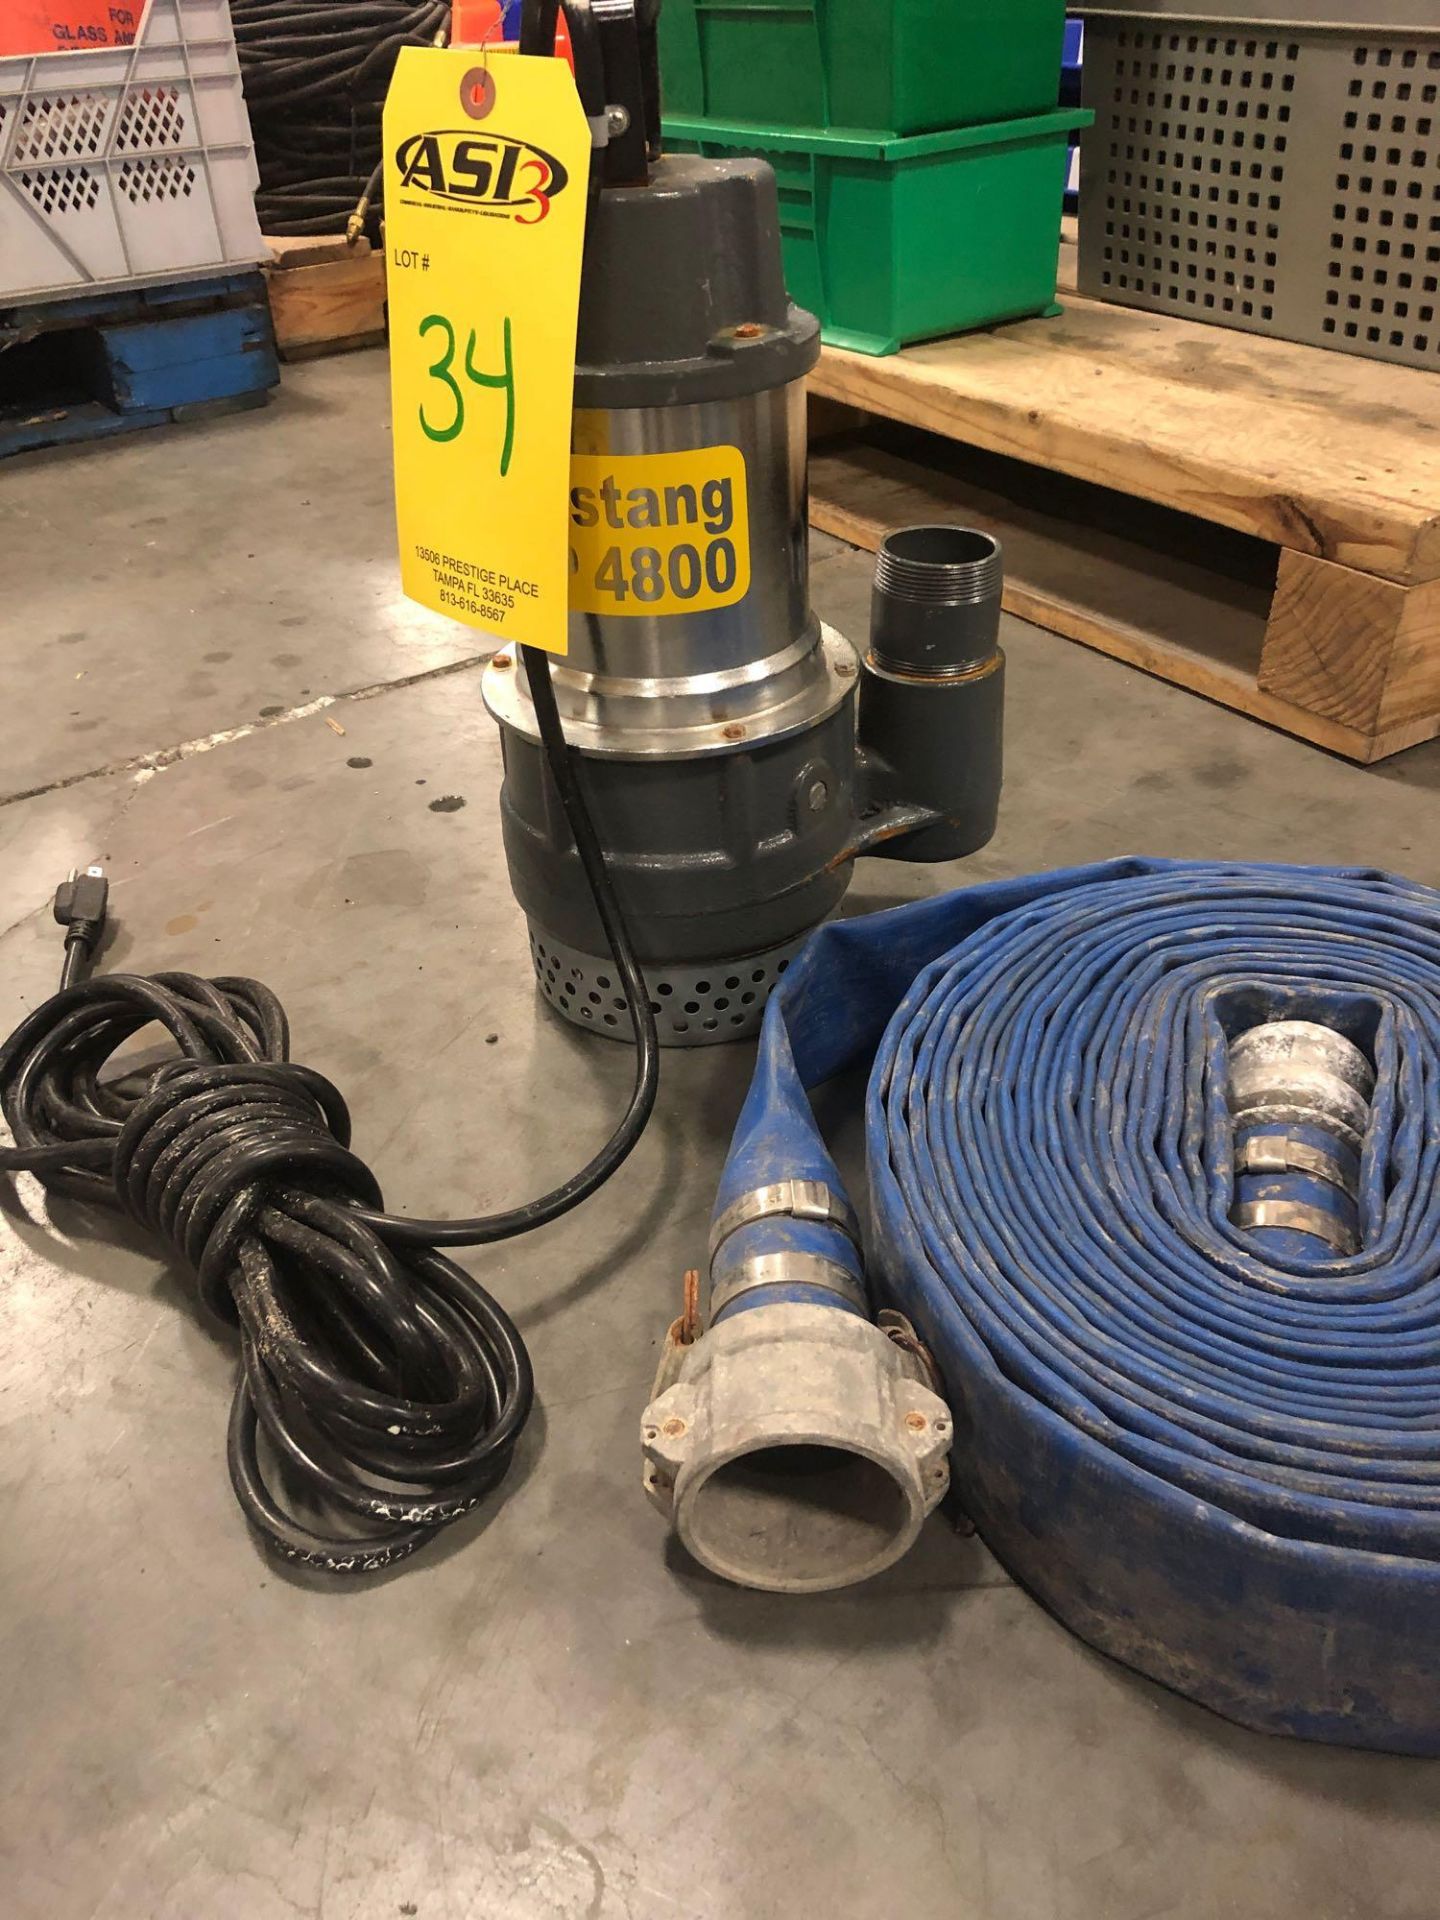 NEW 2" MUSTANG MP4800 SUB. PUMP W/ HOSE - Image 2 of 2